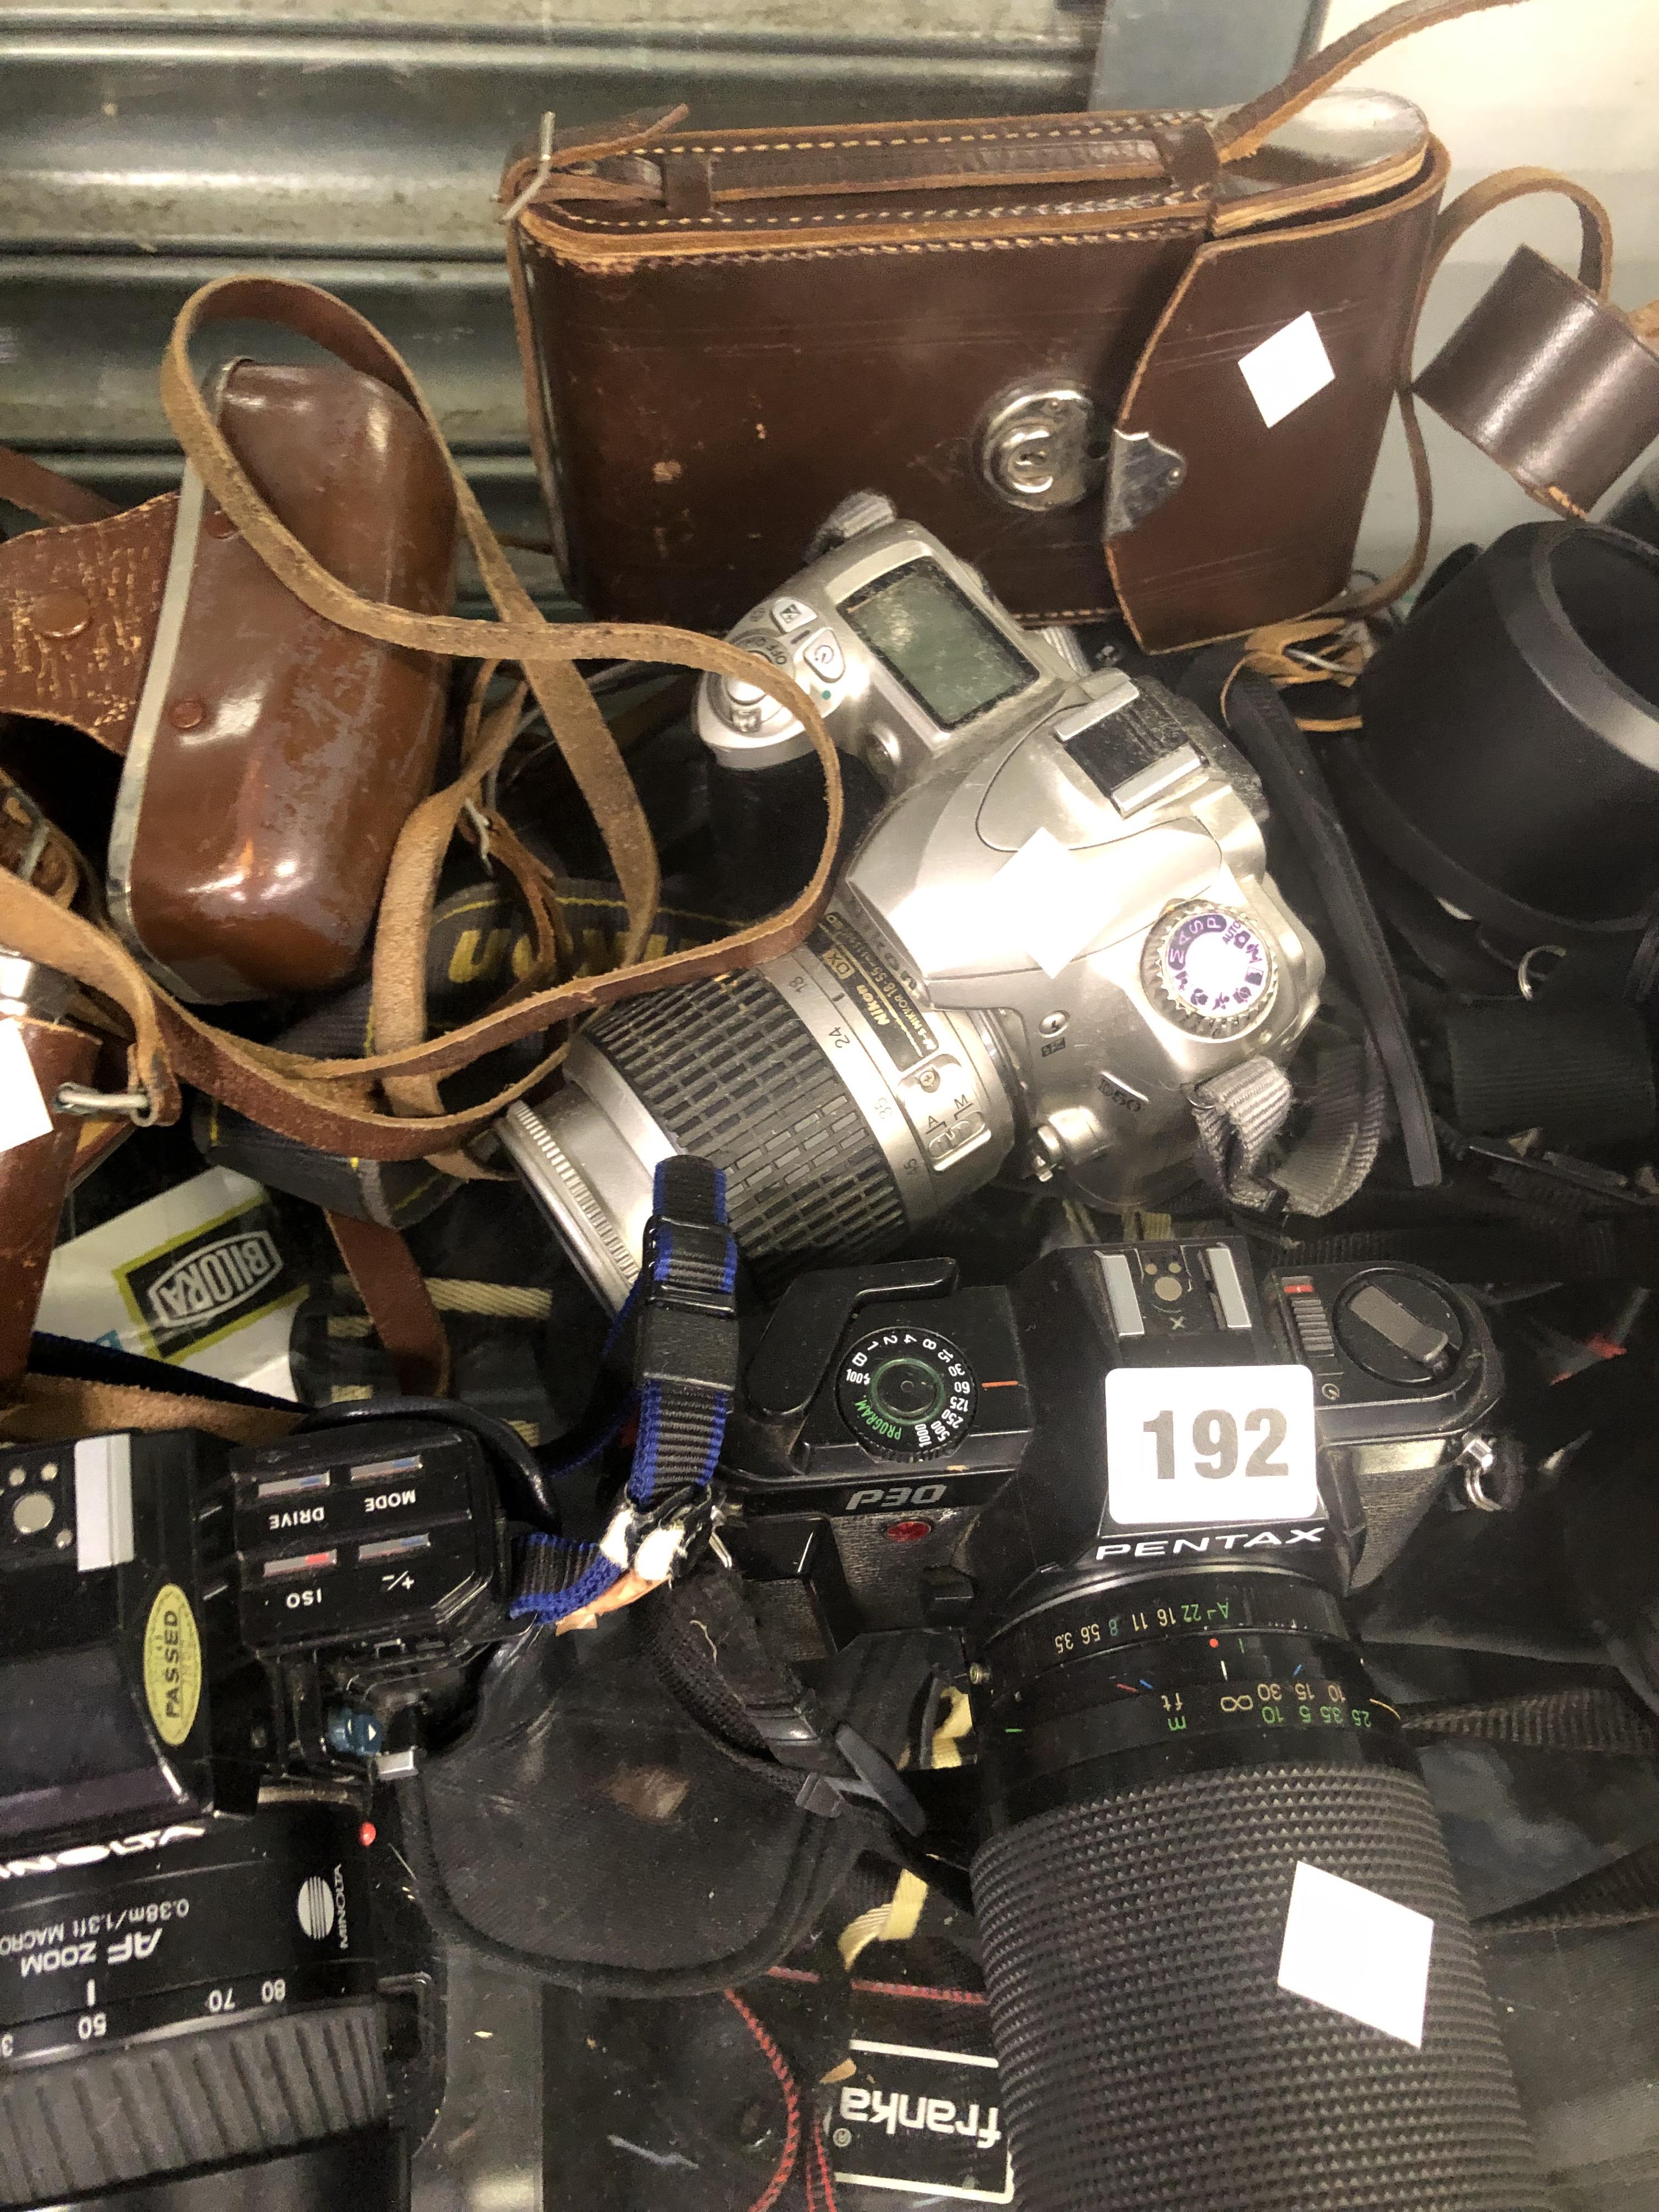 A LARGE COLLECTION SLR AND OTHER CAMERAS. - Image 2 of 6